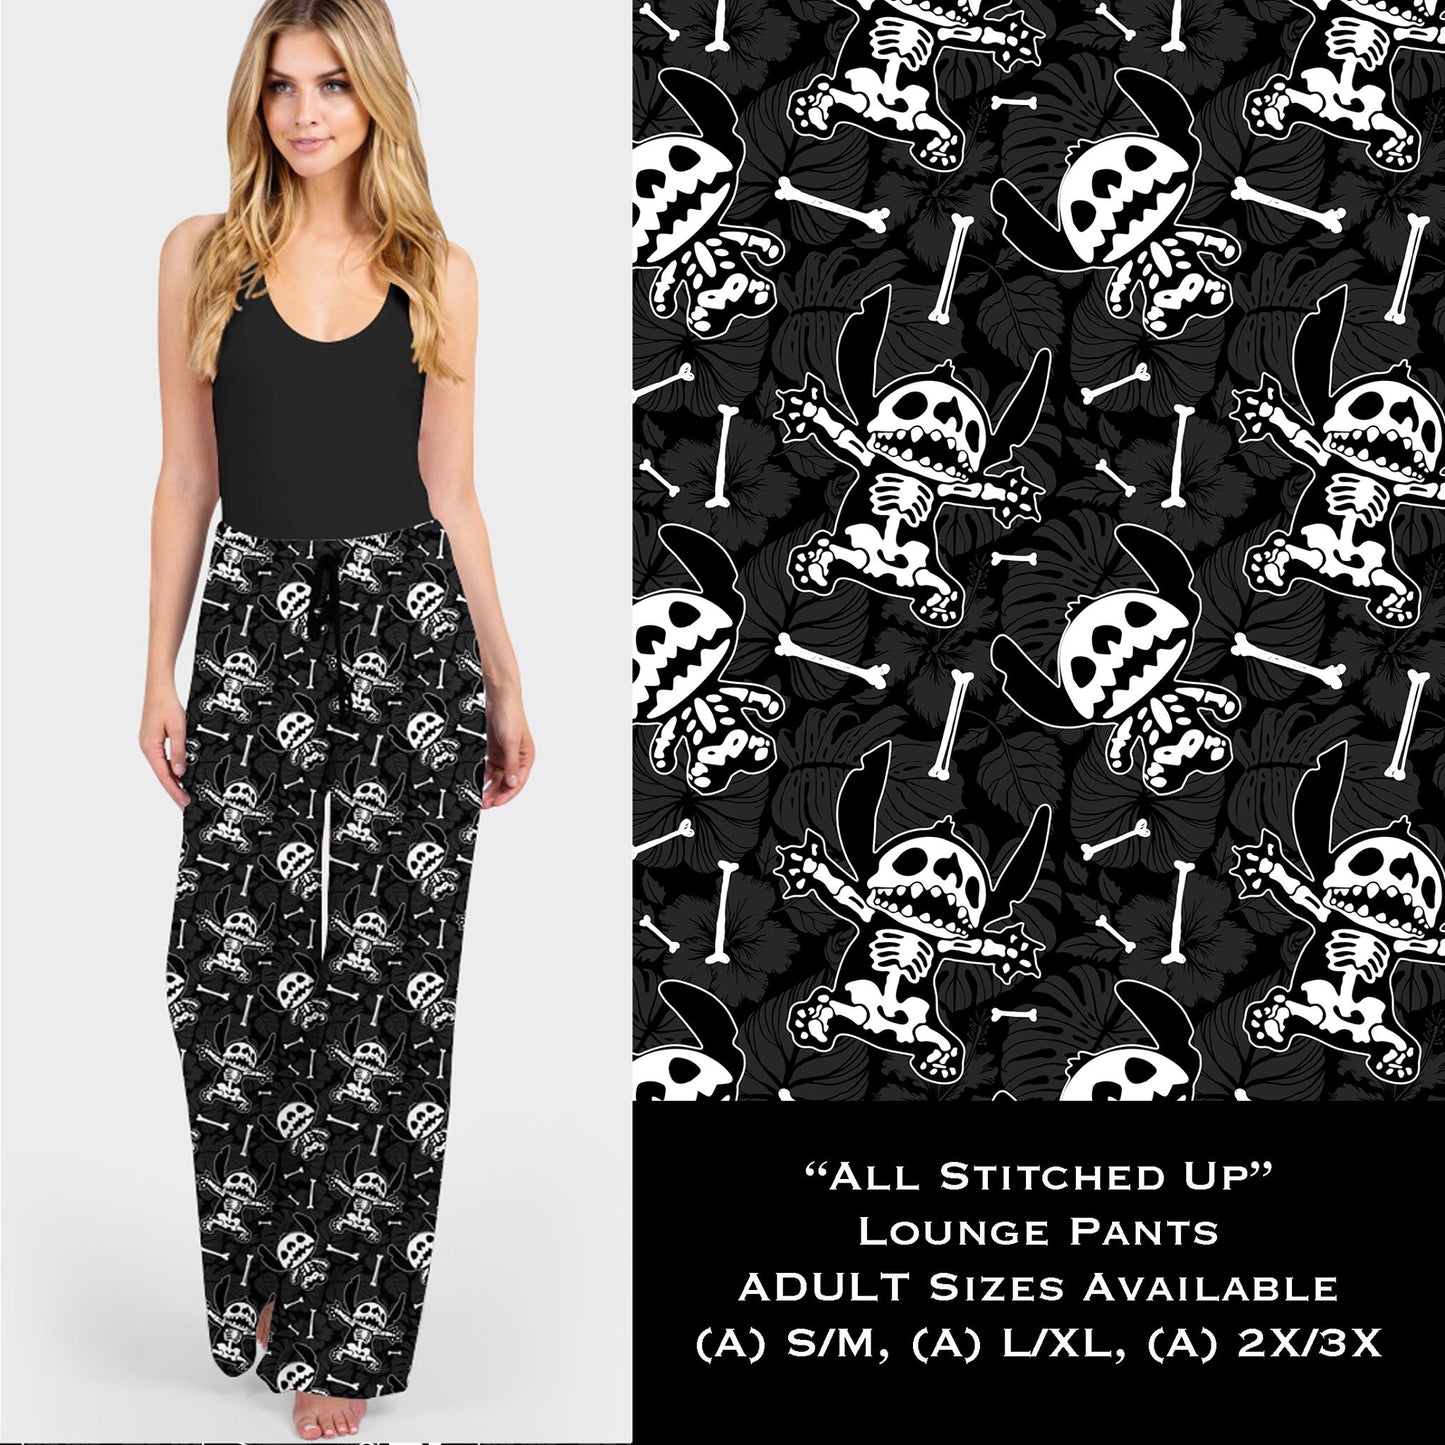 All Stitched Up - Lounge Pants